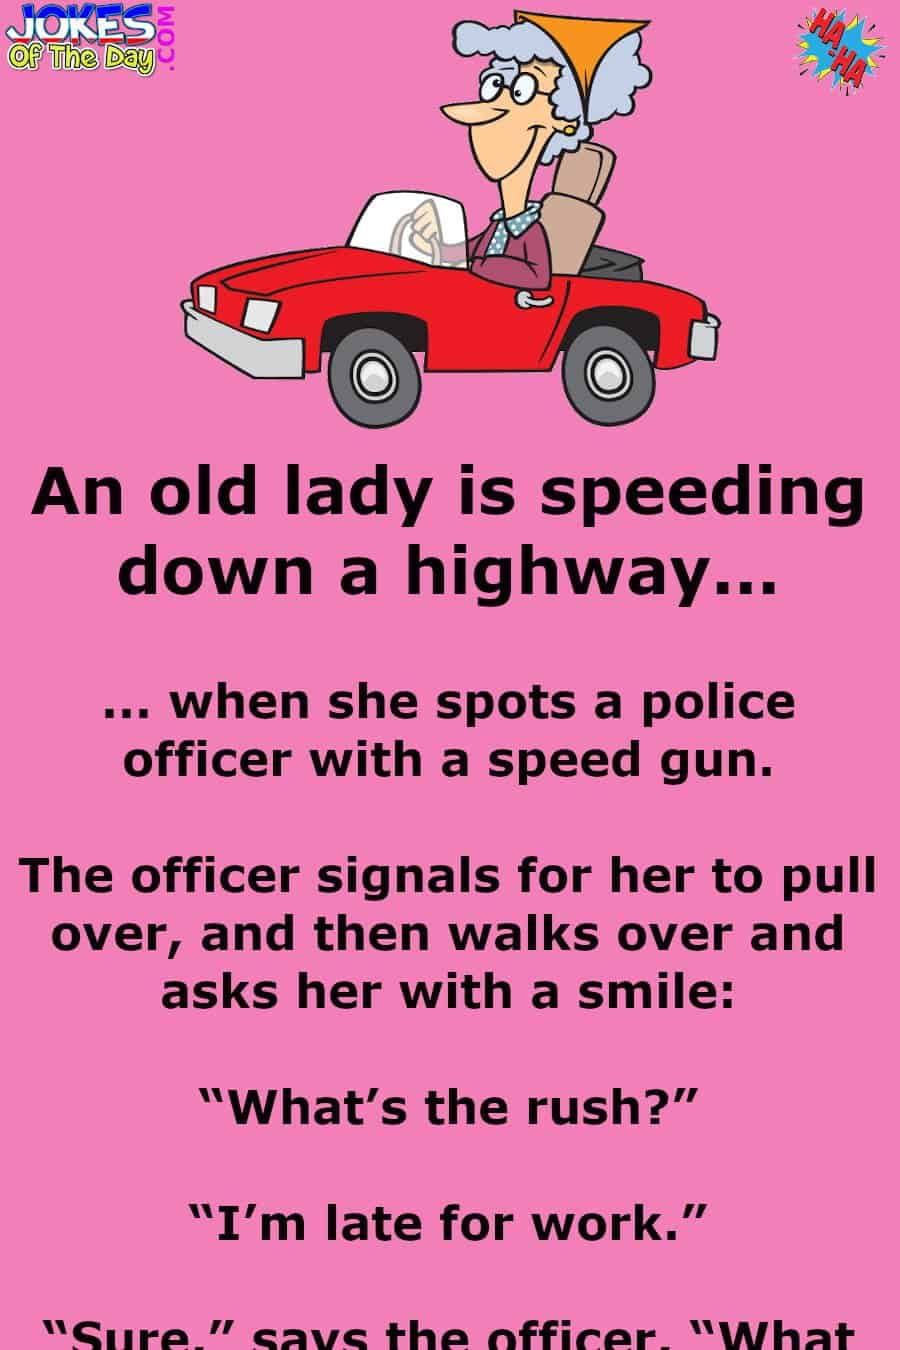 Funny Police Joke - An old lady is speeding down a highway  ‣ Jokes Of The Day 